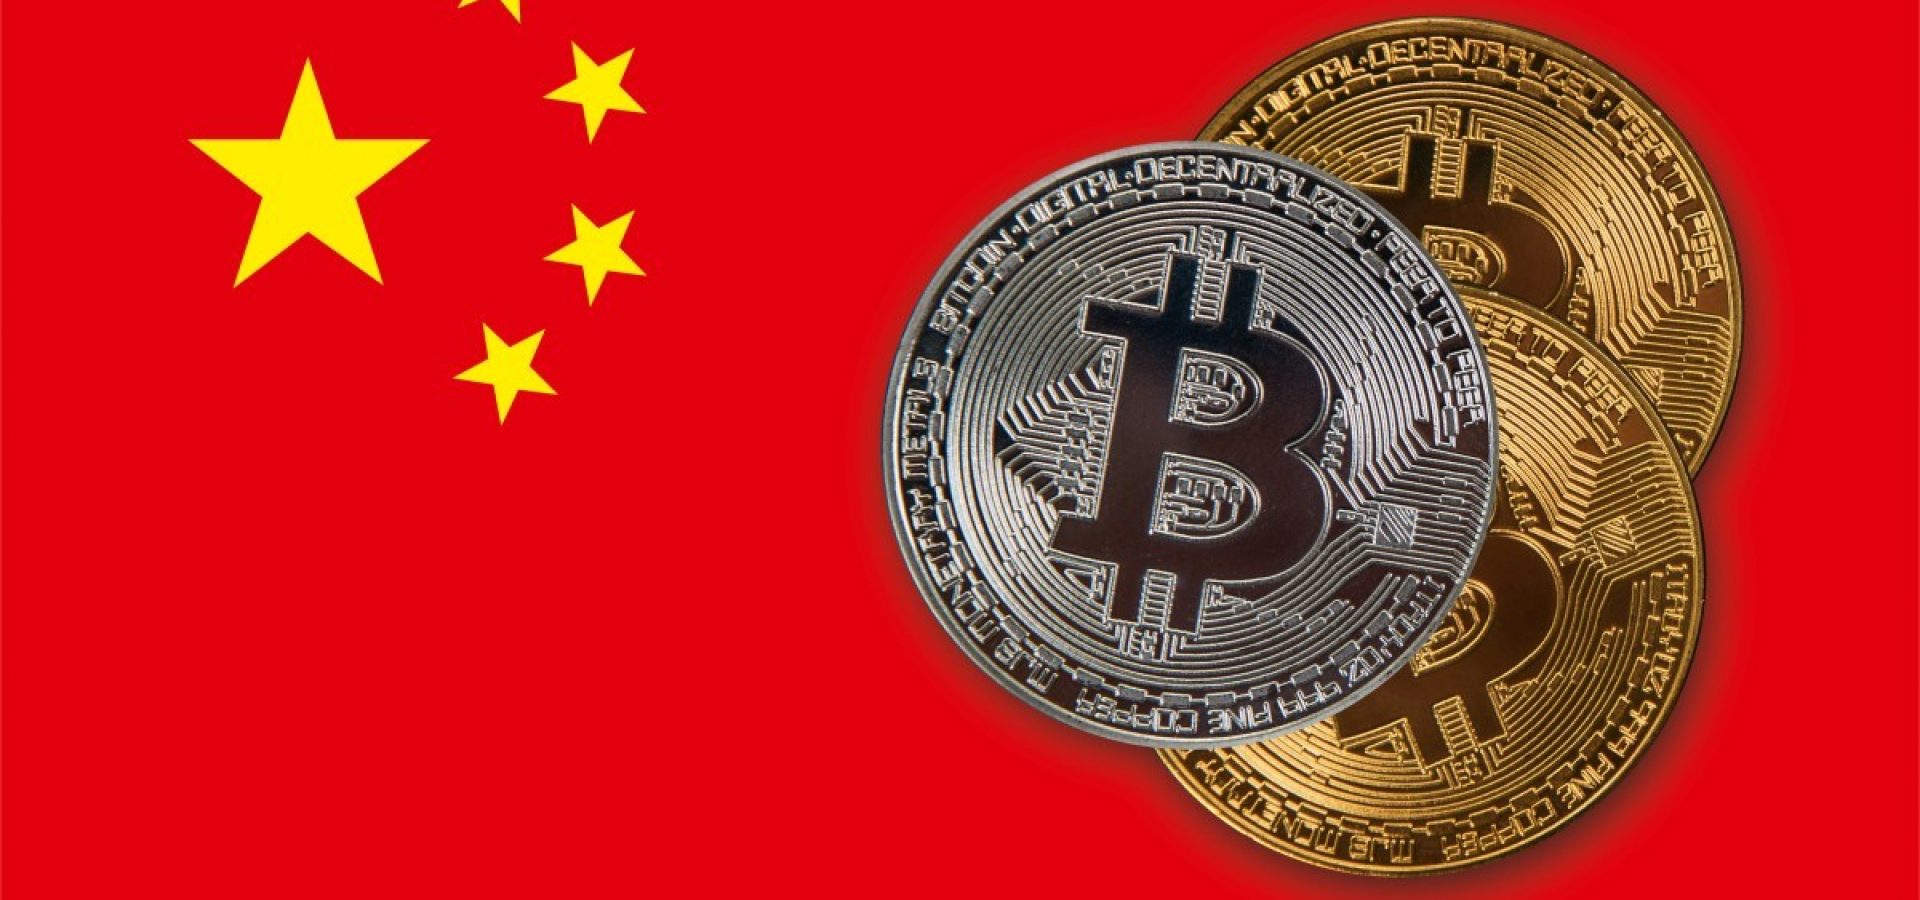 China and its Central Bank Digital Currency